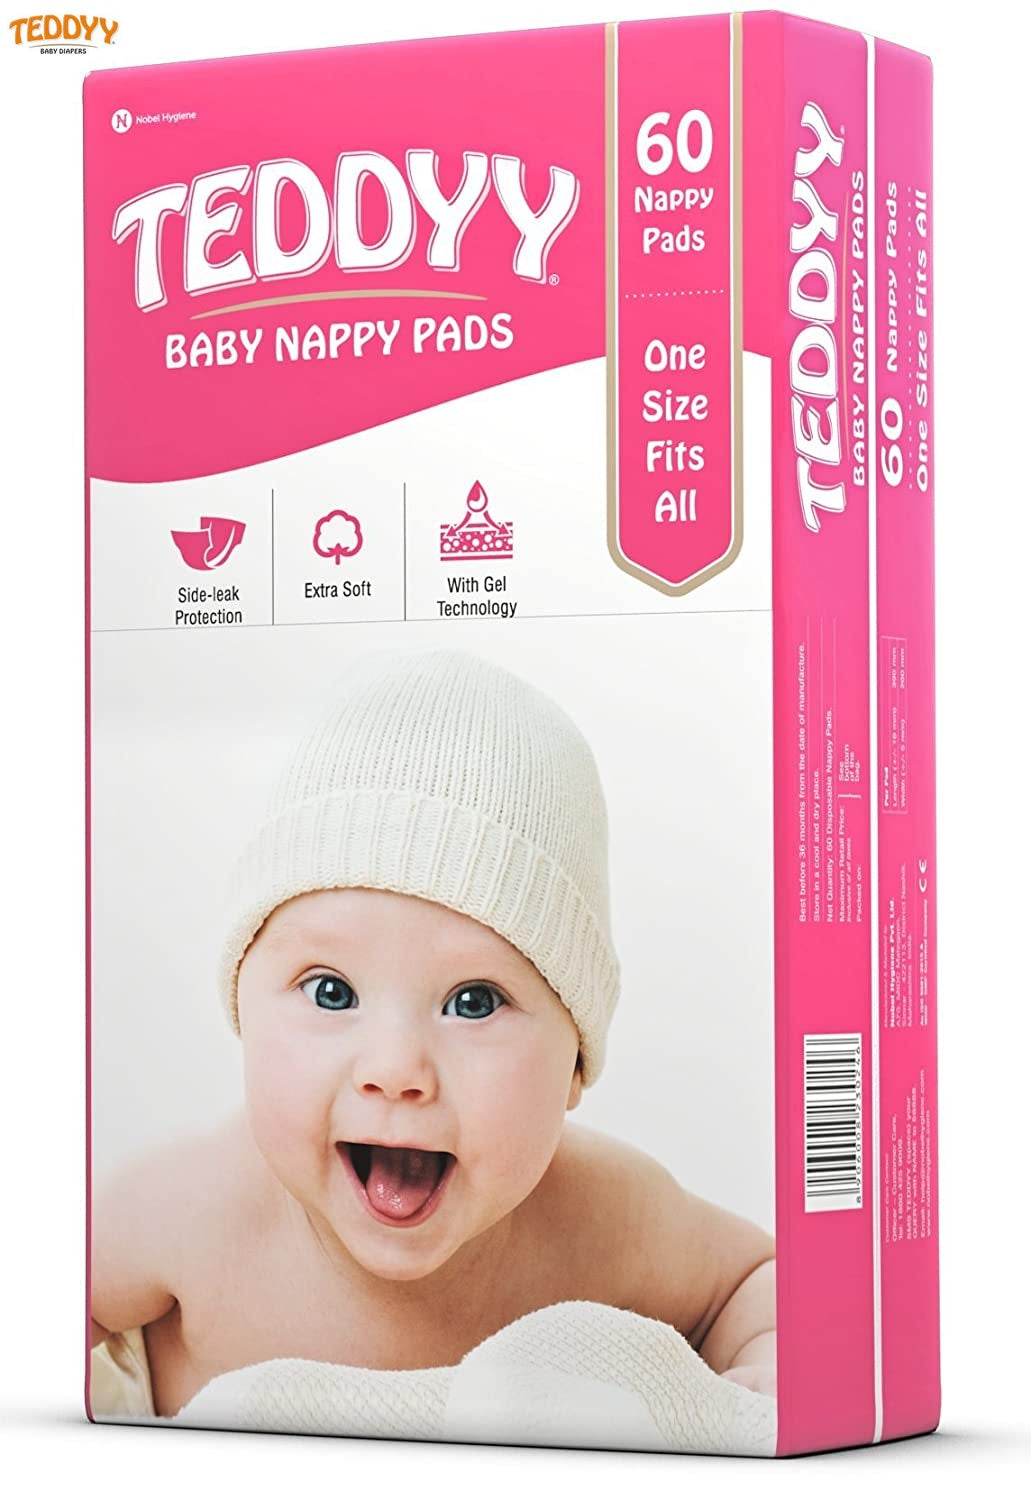 Teddyy Baby Nappy Pads 60 Pads With Free Size